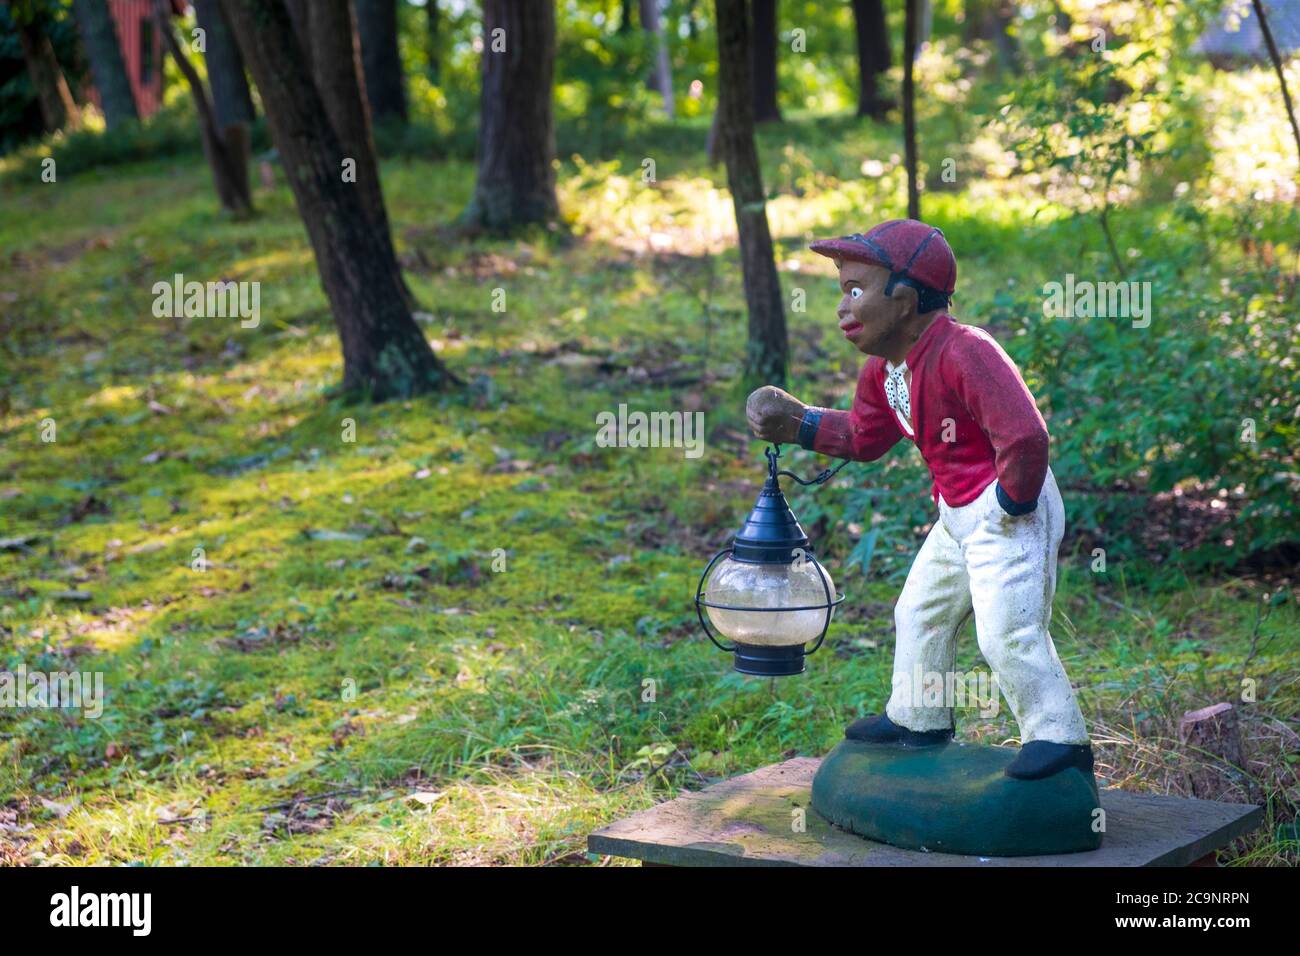 a Lawn Jockey, thought to be a symbolic aid-symbol to escaping slaves on the Underground Railroad, Pennsylvania, USA Stock Photo